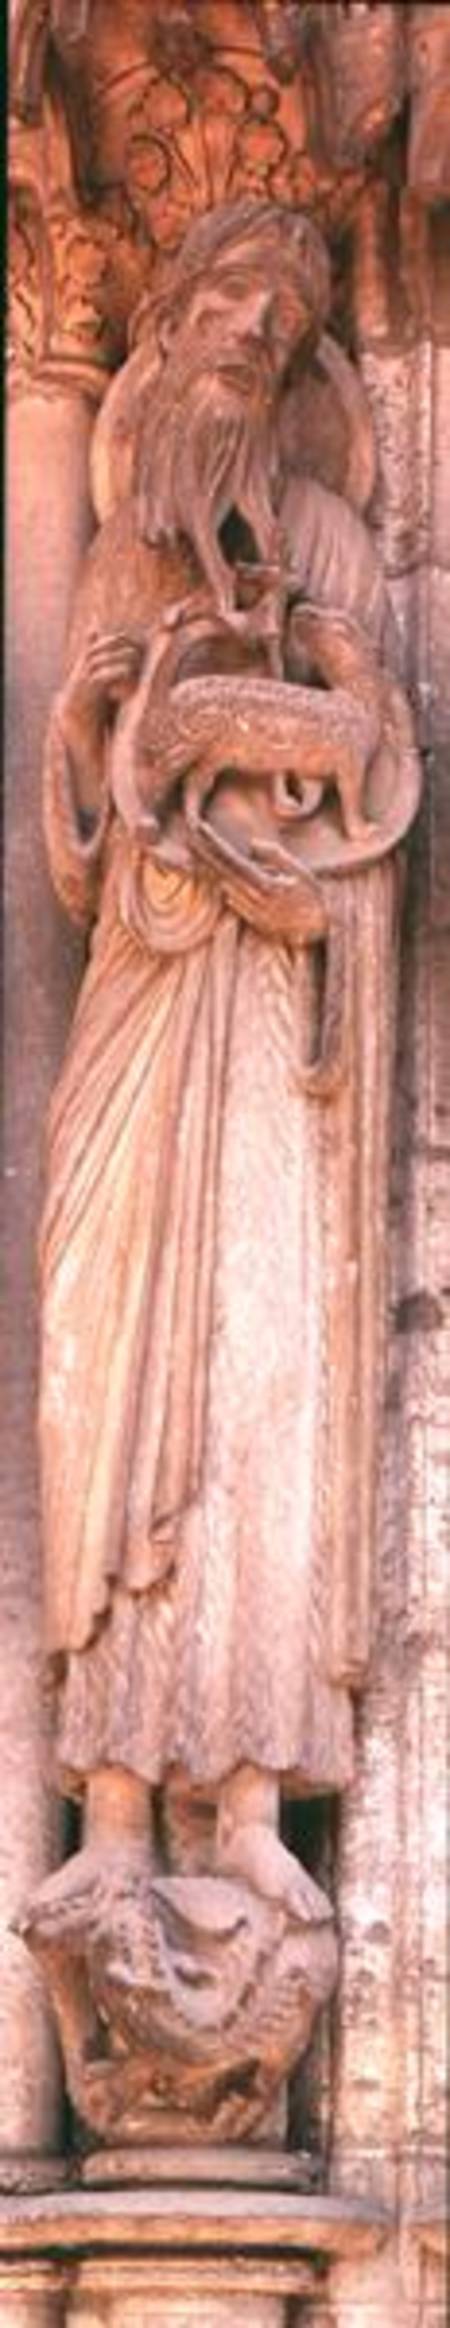 St. John the Baptist, jamb figure from the right hand side of the central door of the north portal a Scuola Francese